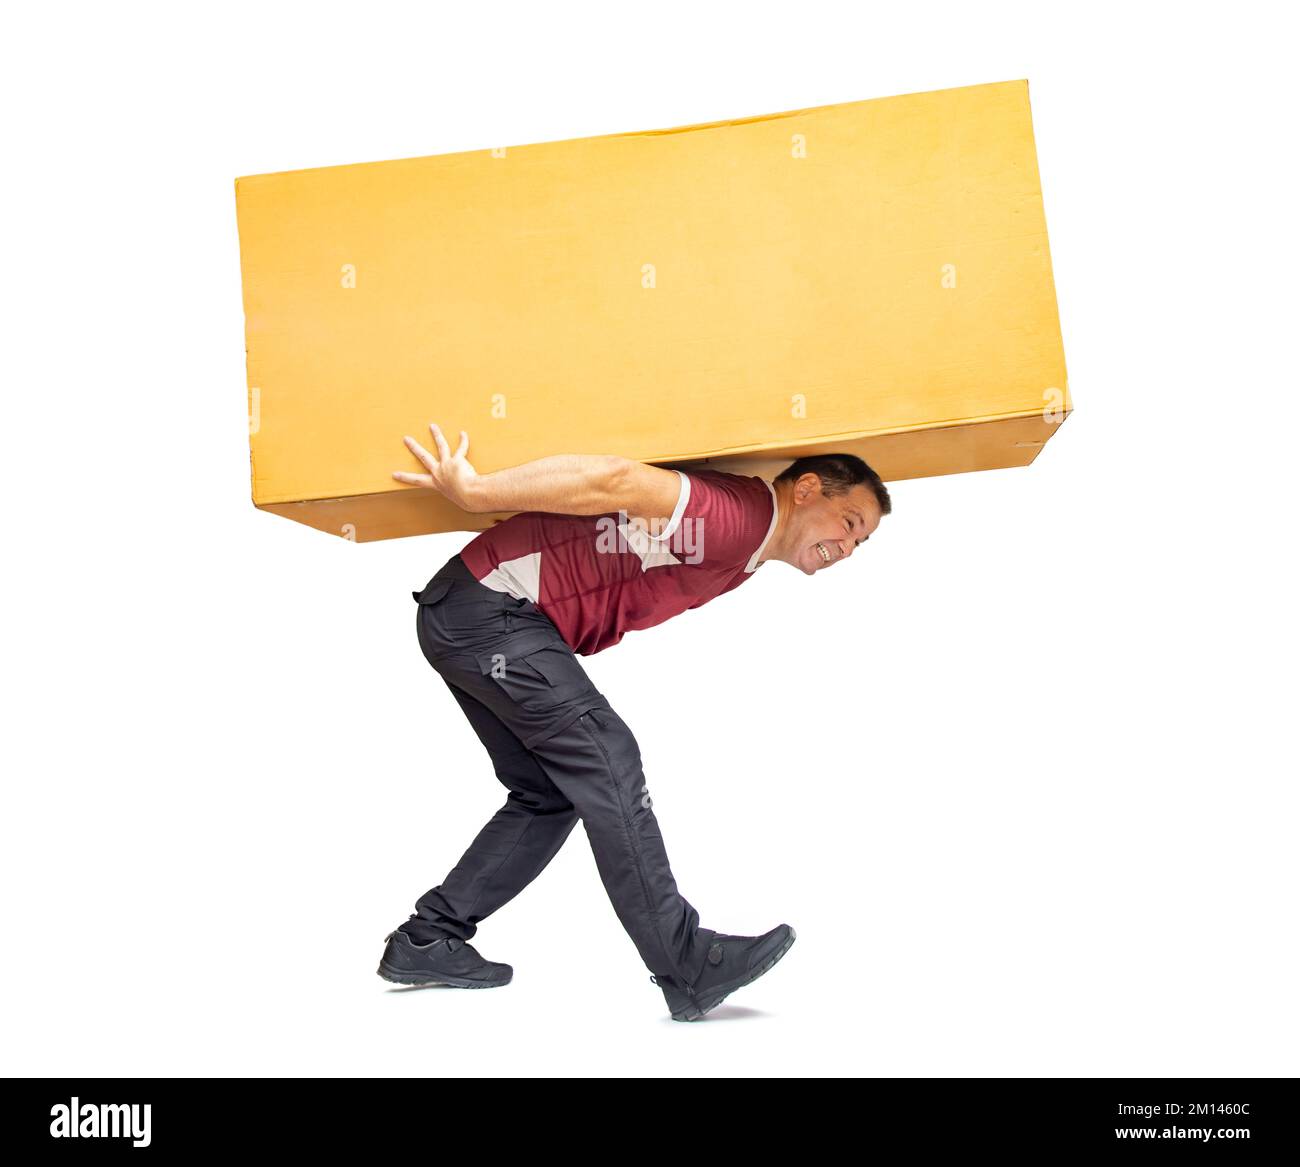 Courier delivering a large package, isolated on a white background. Stock Photo